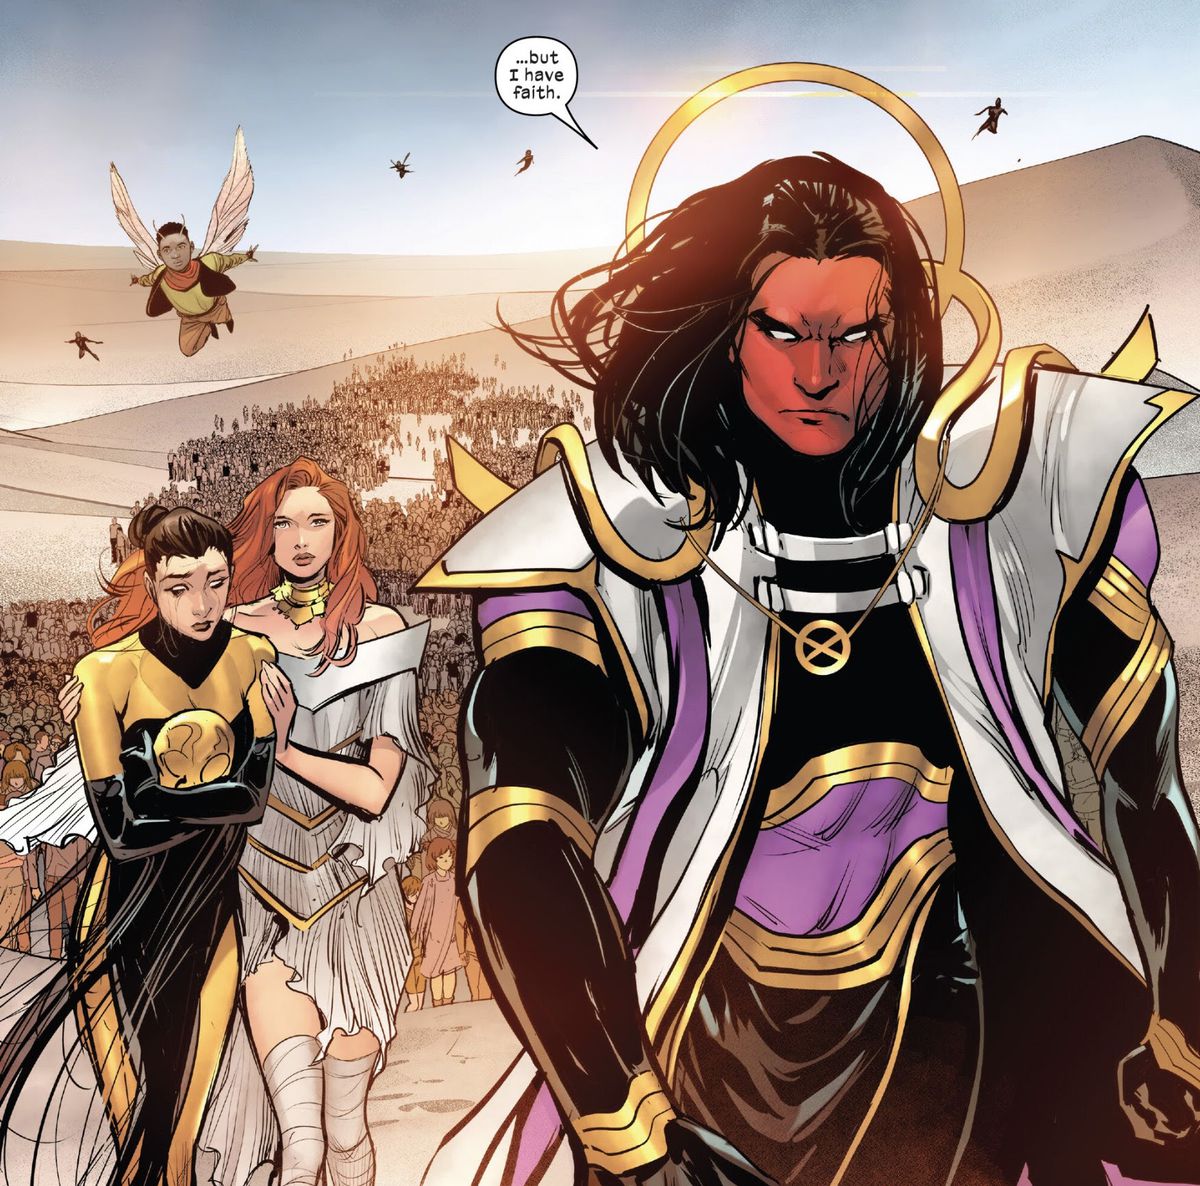 “I have faith,” Exodus says to Hope and Destiny, as they lead thousands of mutants across a vast desert in Immortal X-Men #14 (2023).